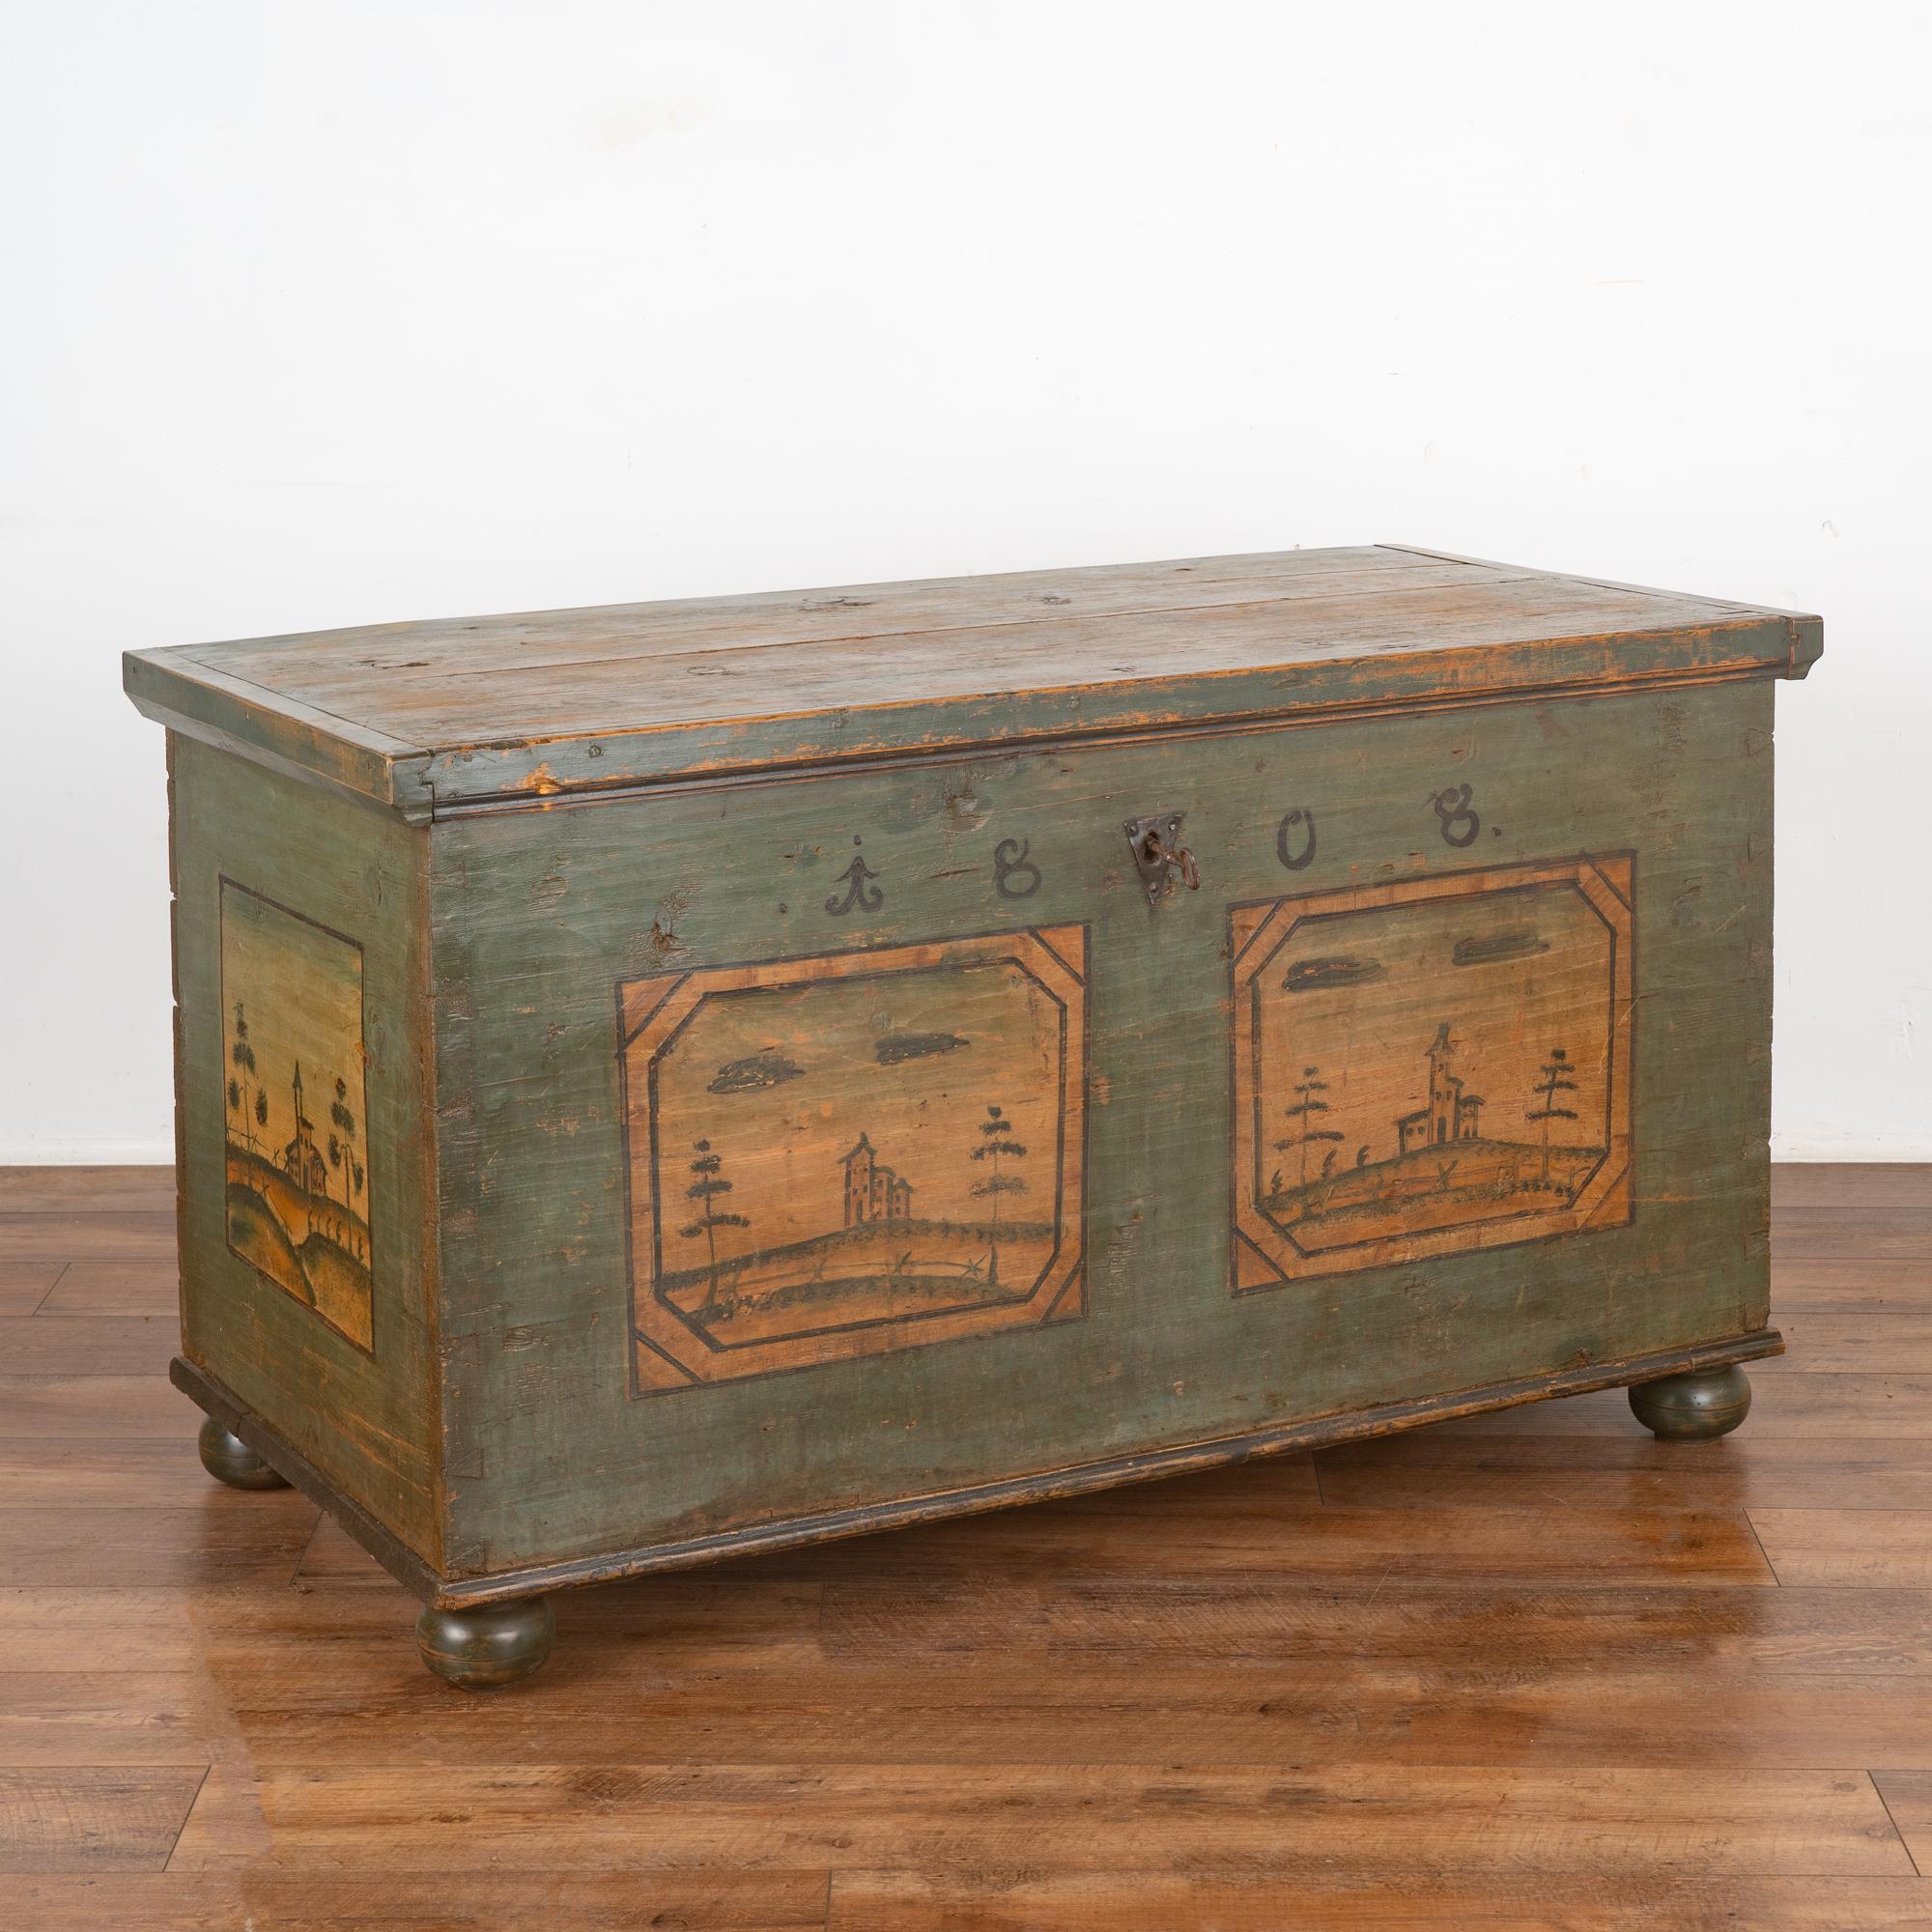 The charm of this original painted trunk comes from the simplistic landscape painting that still graces the front, even after 200 years of use.
Please enlarge photos to appreciate the painted panels, colors (primarily green with blue undertones),